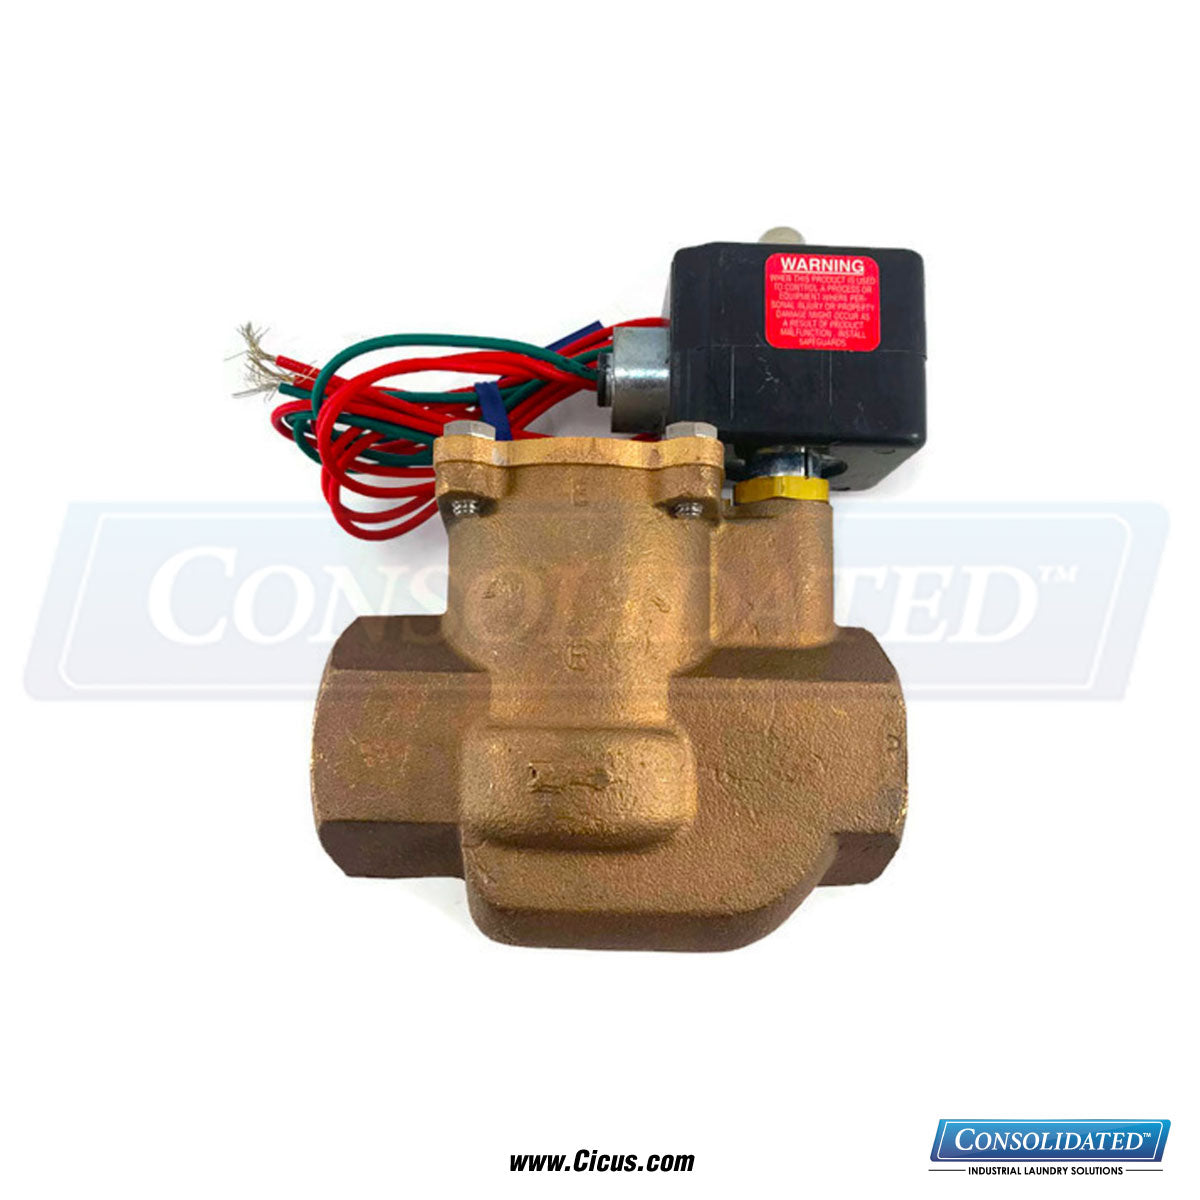 1.25" Hays Valve 240V / 60 / 50 - Compatible With Milnor [96P151A71]